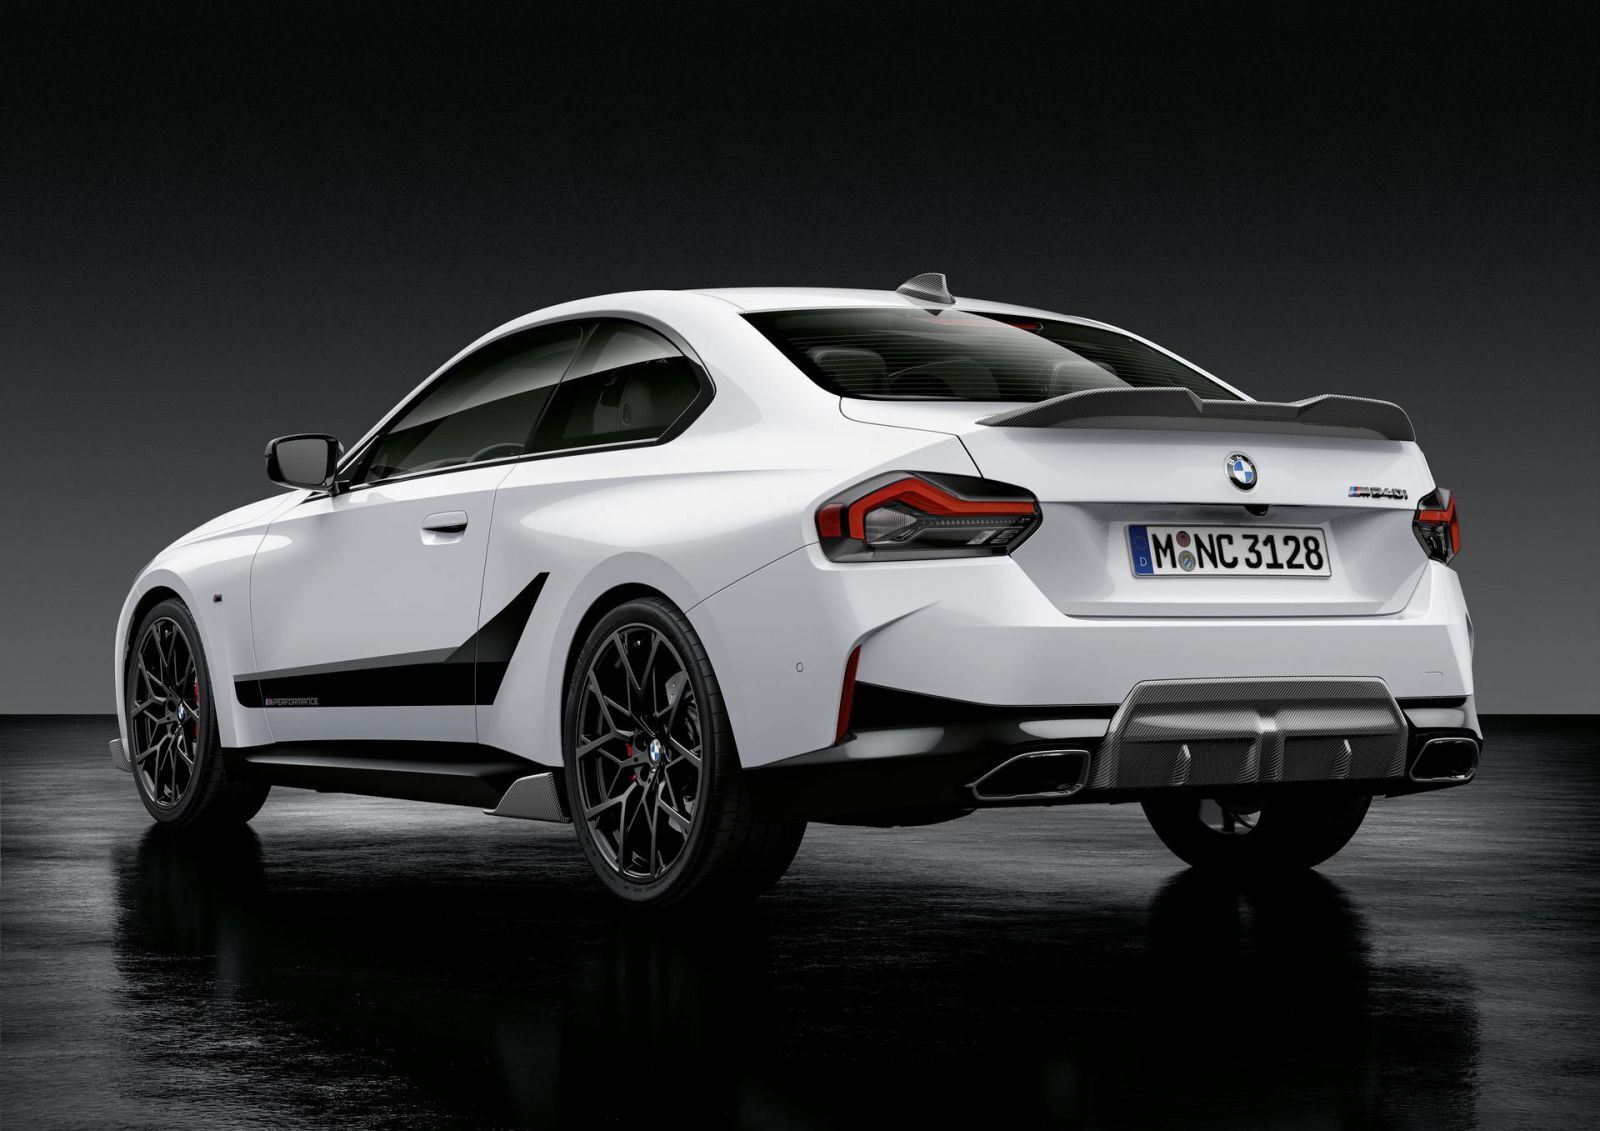 BMW 2-Series Coupe 